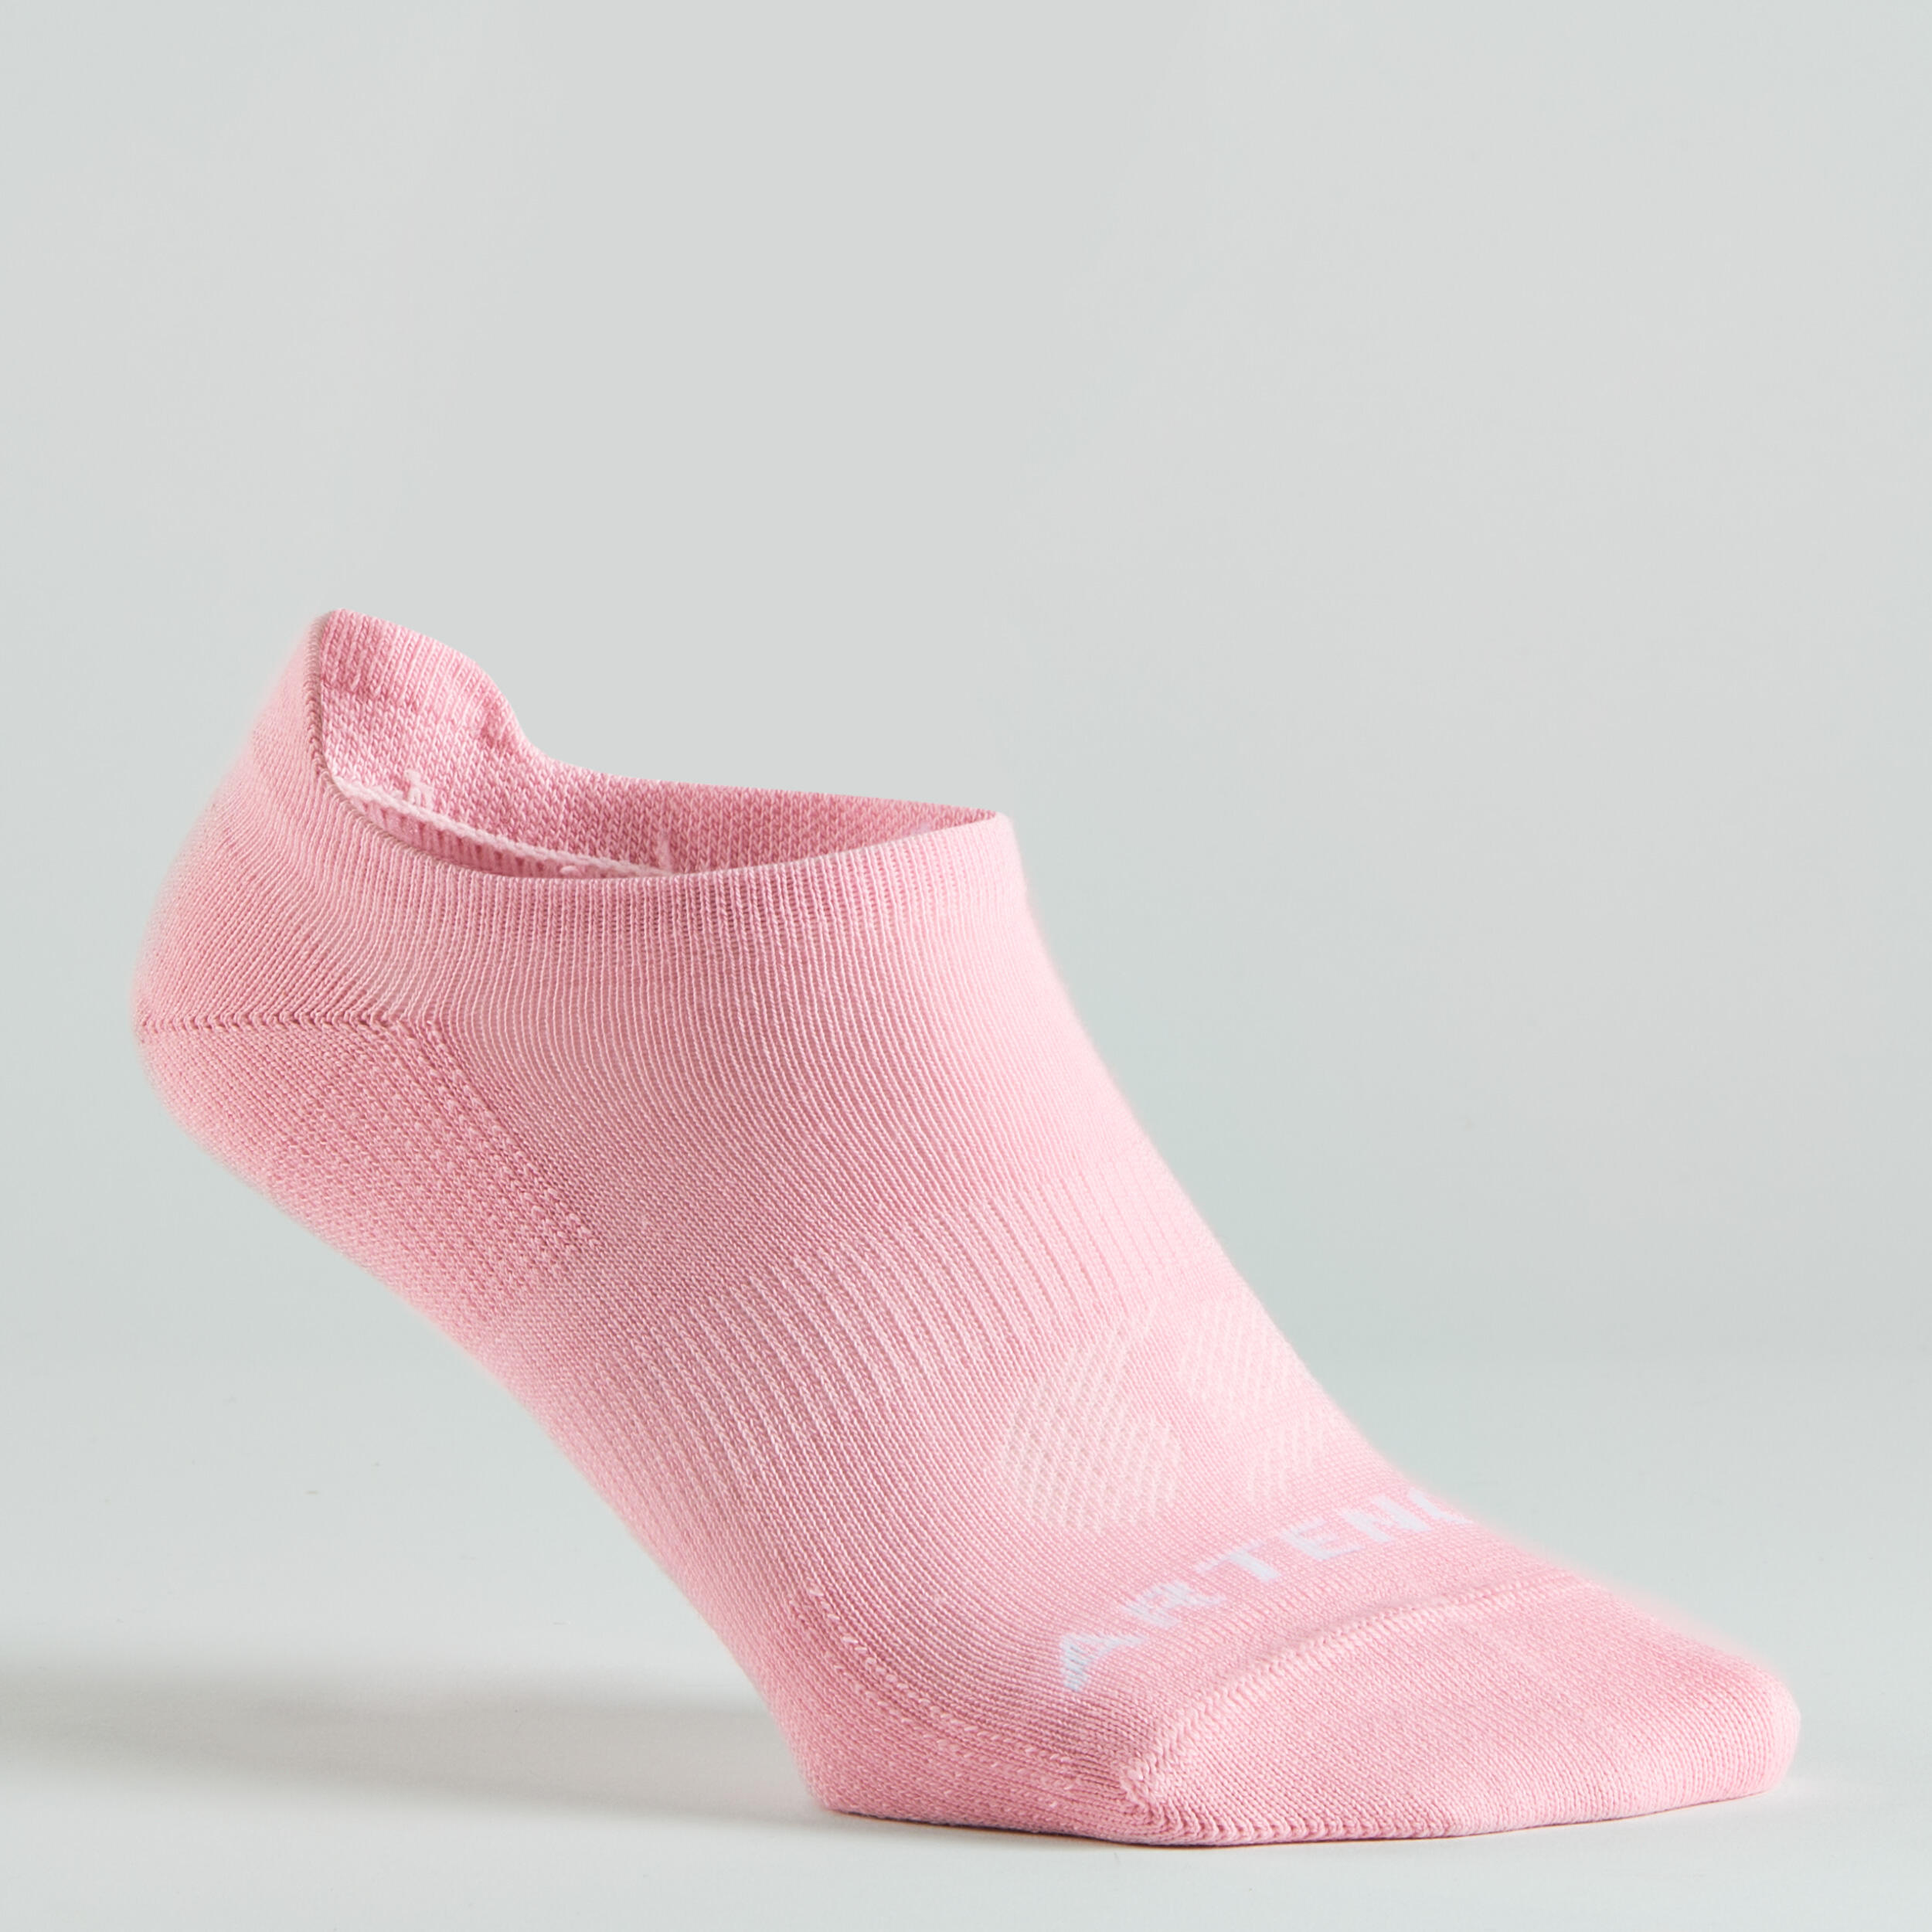 Low Sports Socks RS 160 Tri-Pack - Pink/White/China Blue 2/14